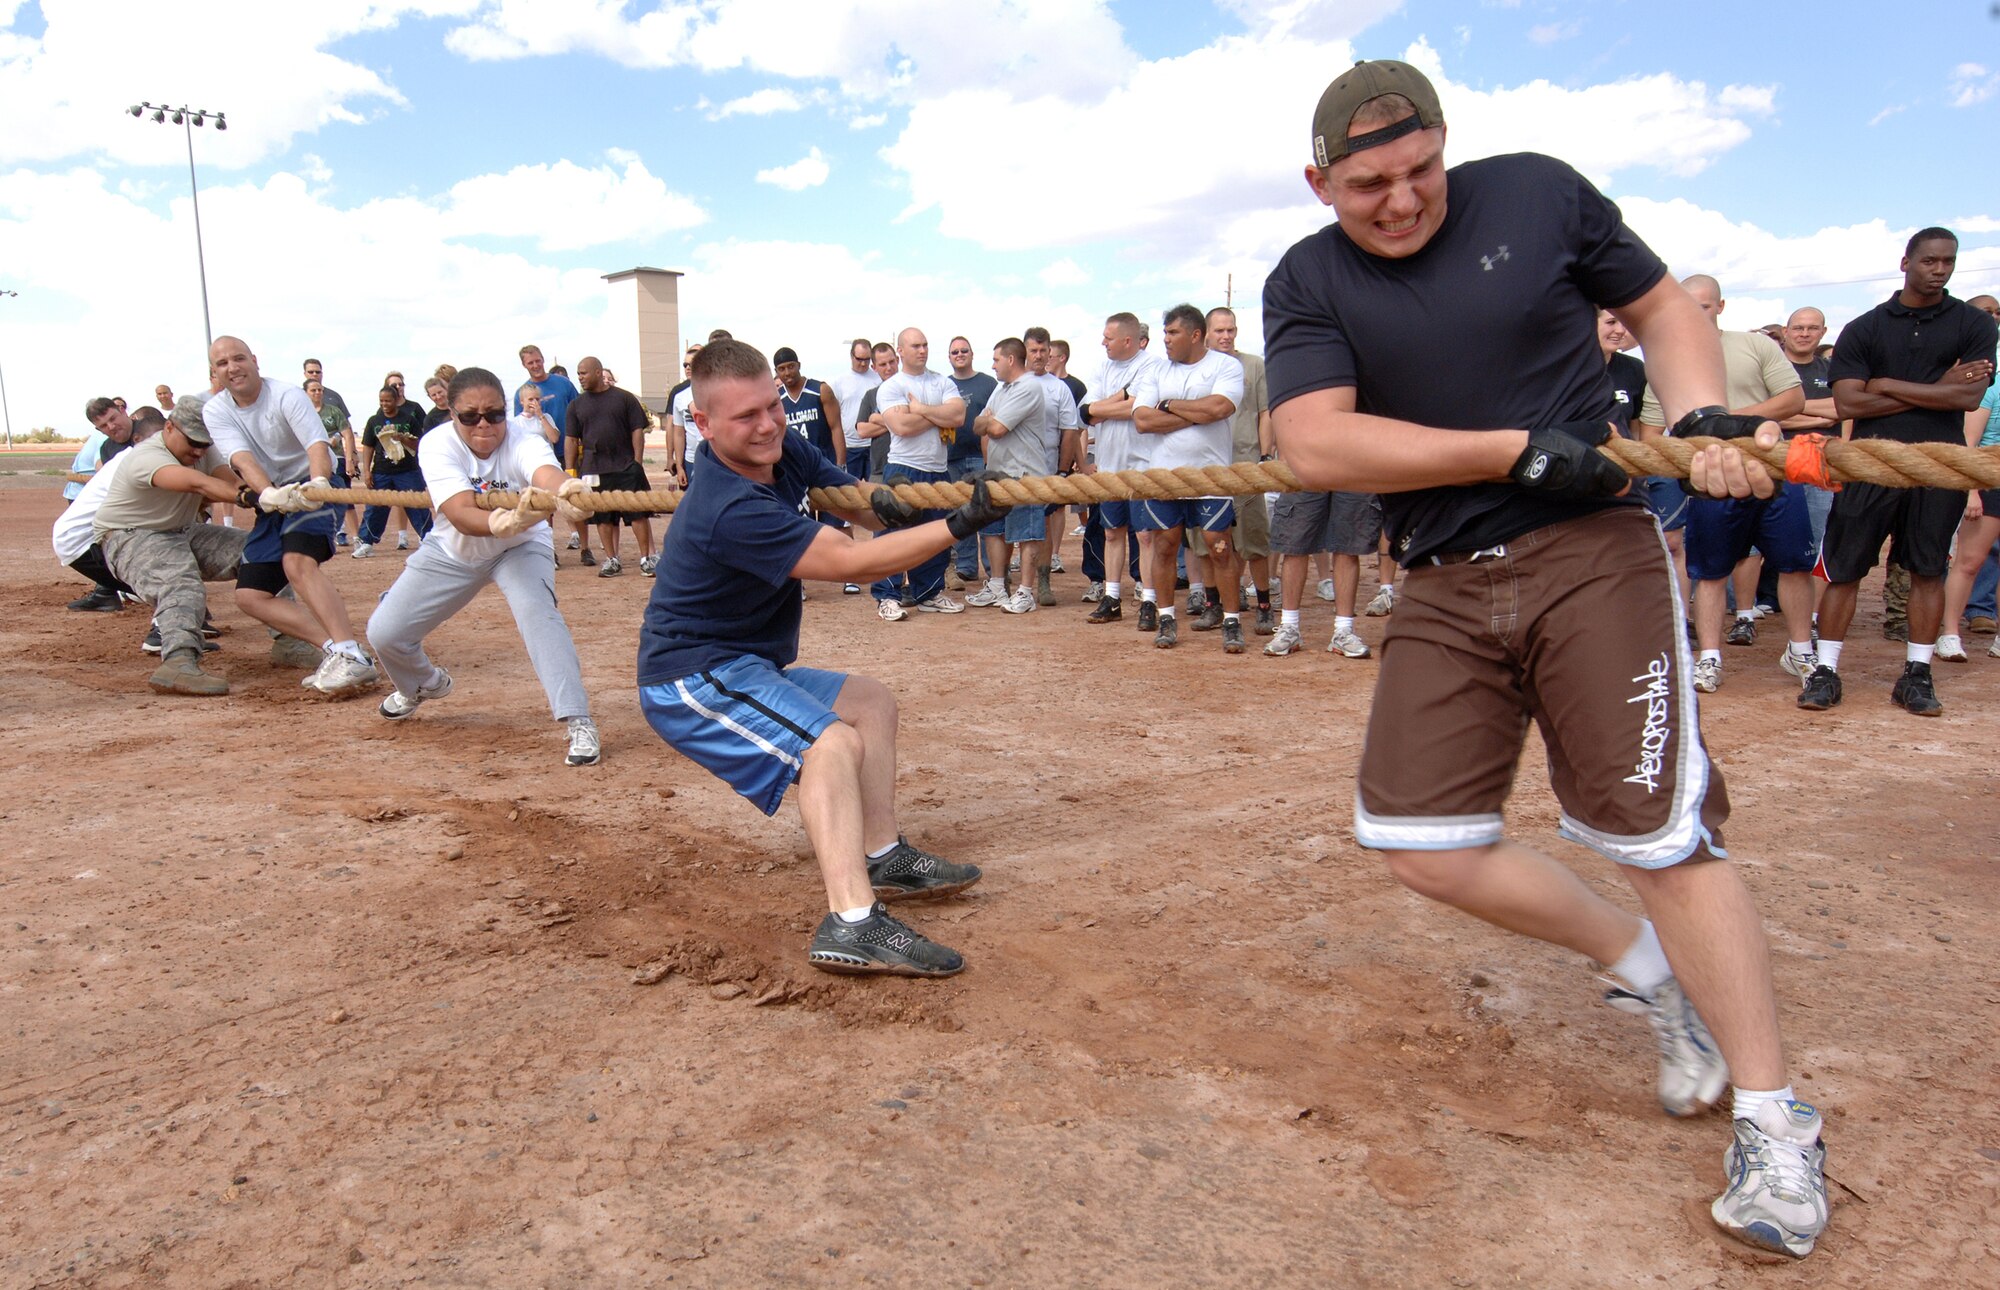 Airmen from 49th Fighter Wing compete in the tug-of-war competition during Sports Day at Holloman Air Force Base, N.M., October 10. Airmen from all squadrons come out to participate in many of Hollomans 15 different events. (U.S. Air Force photo/Airman 1st Class Michael Means)